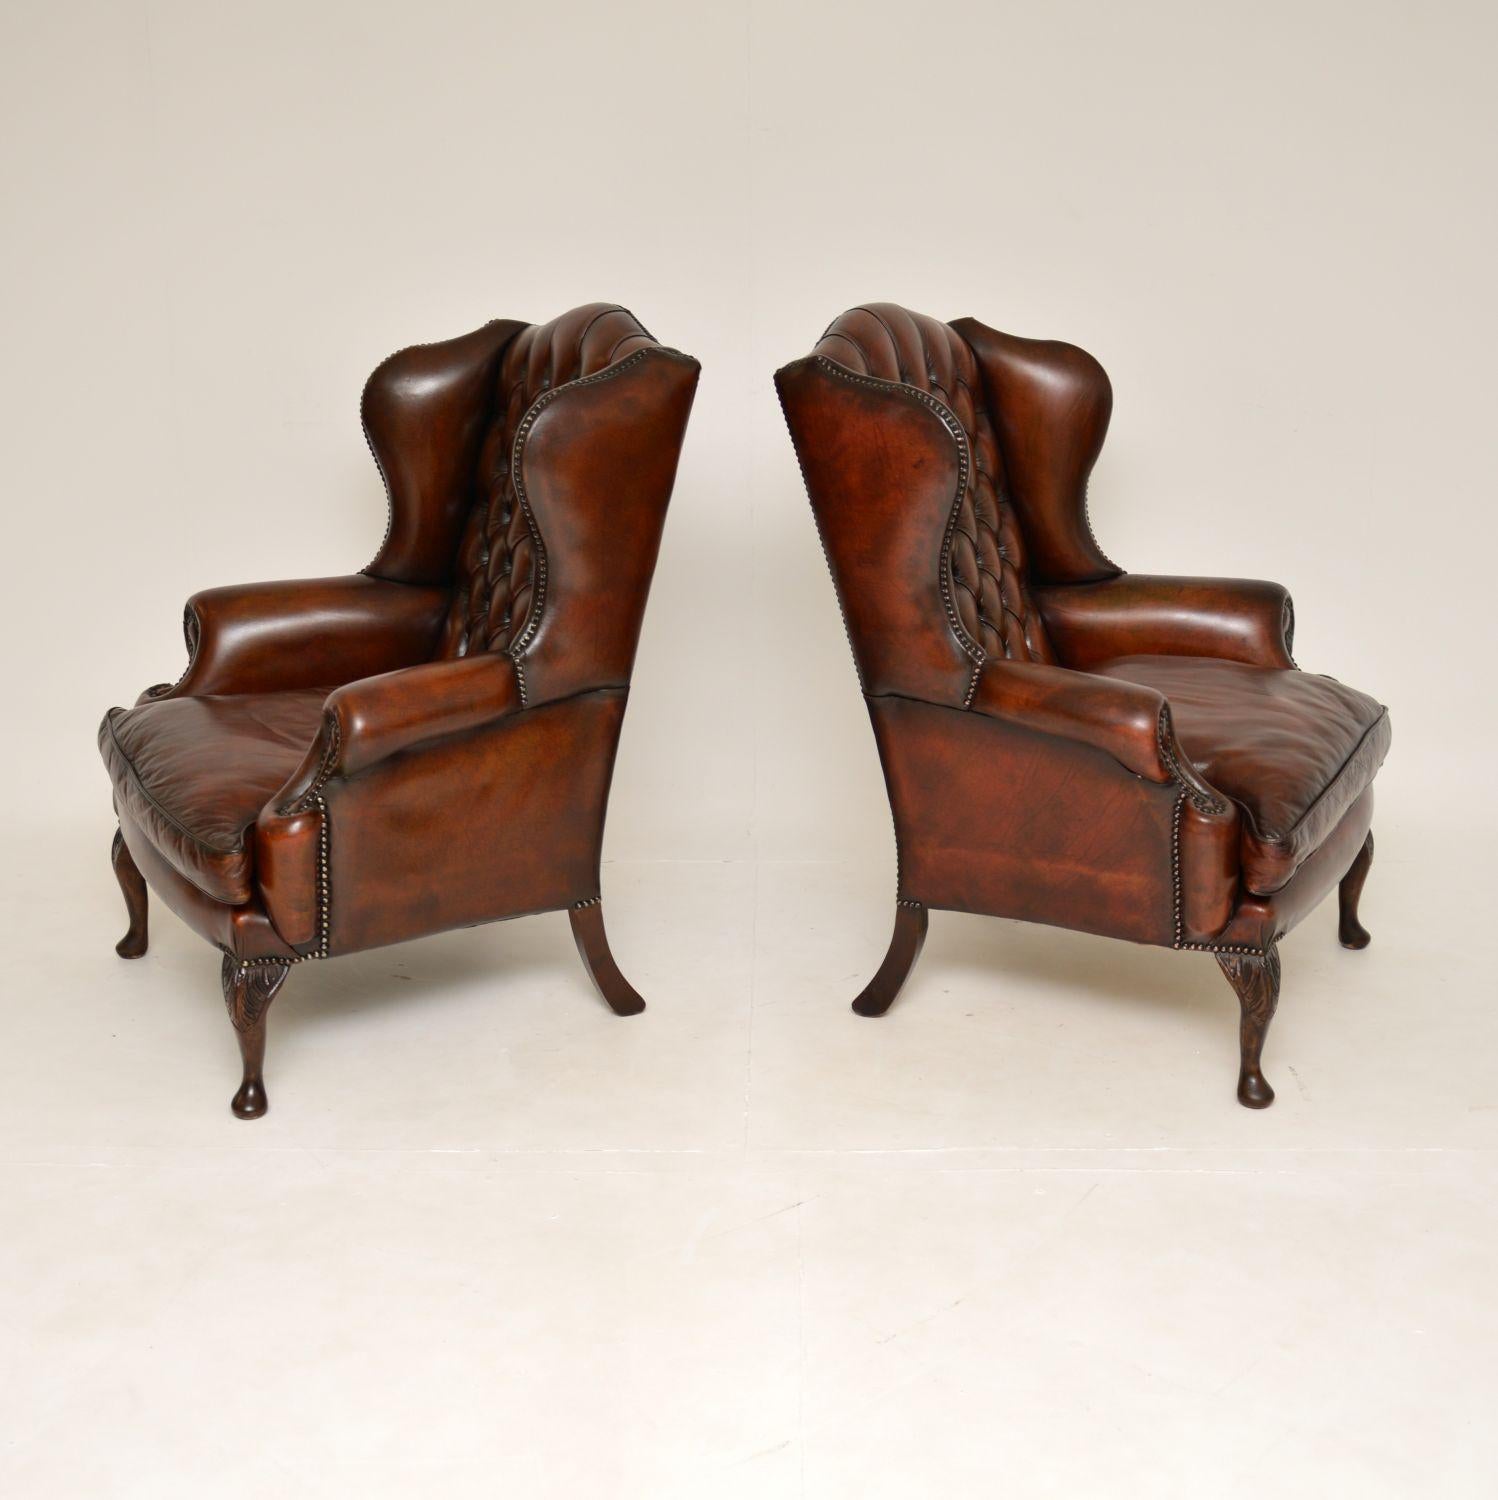 Chippendale Pair of Antique Leather Wing Back Armchairs